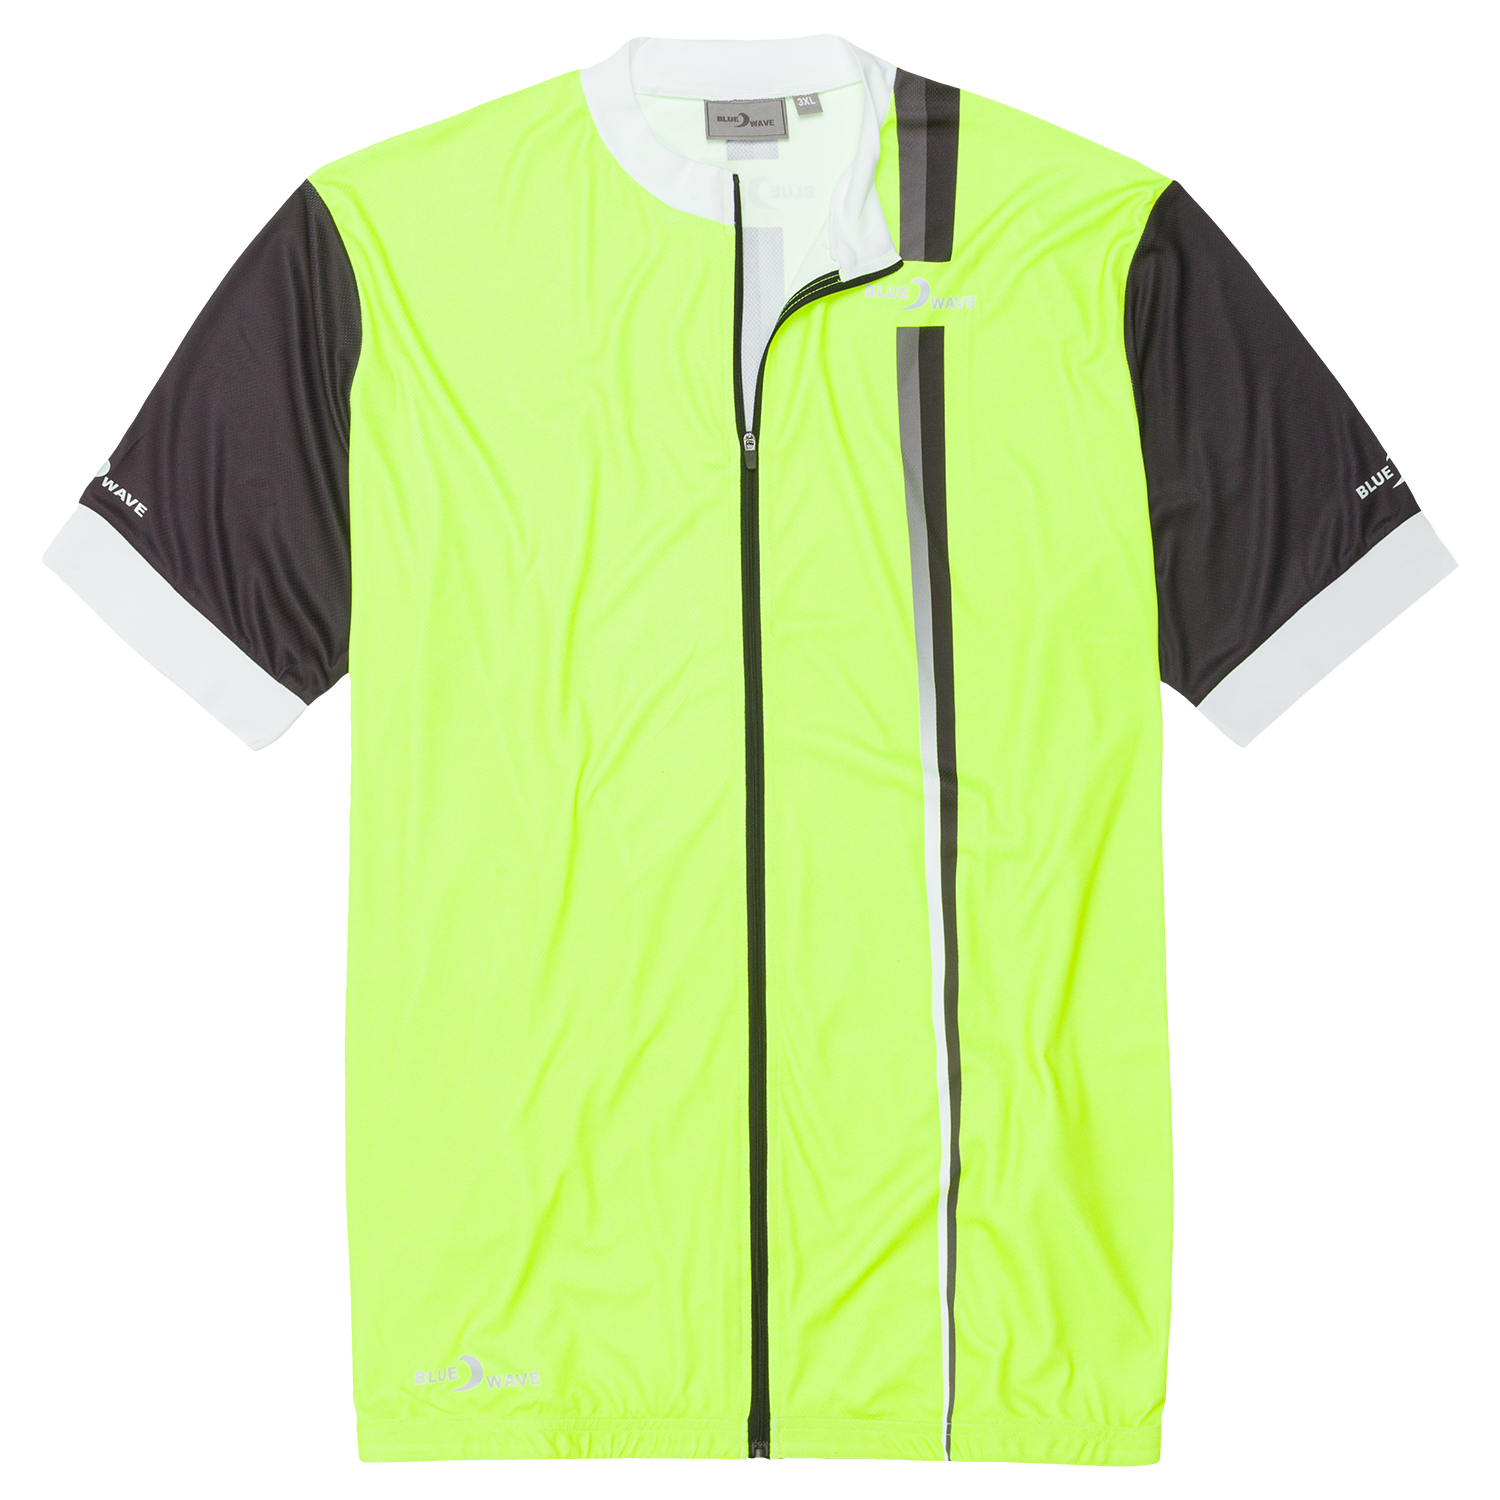 Bike shirt "Alex" in neon yellow by Blue Wave for men up to oversize 8XL